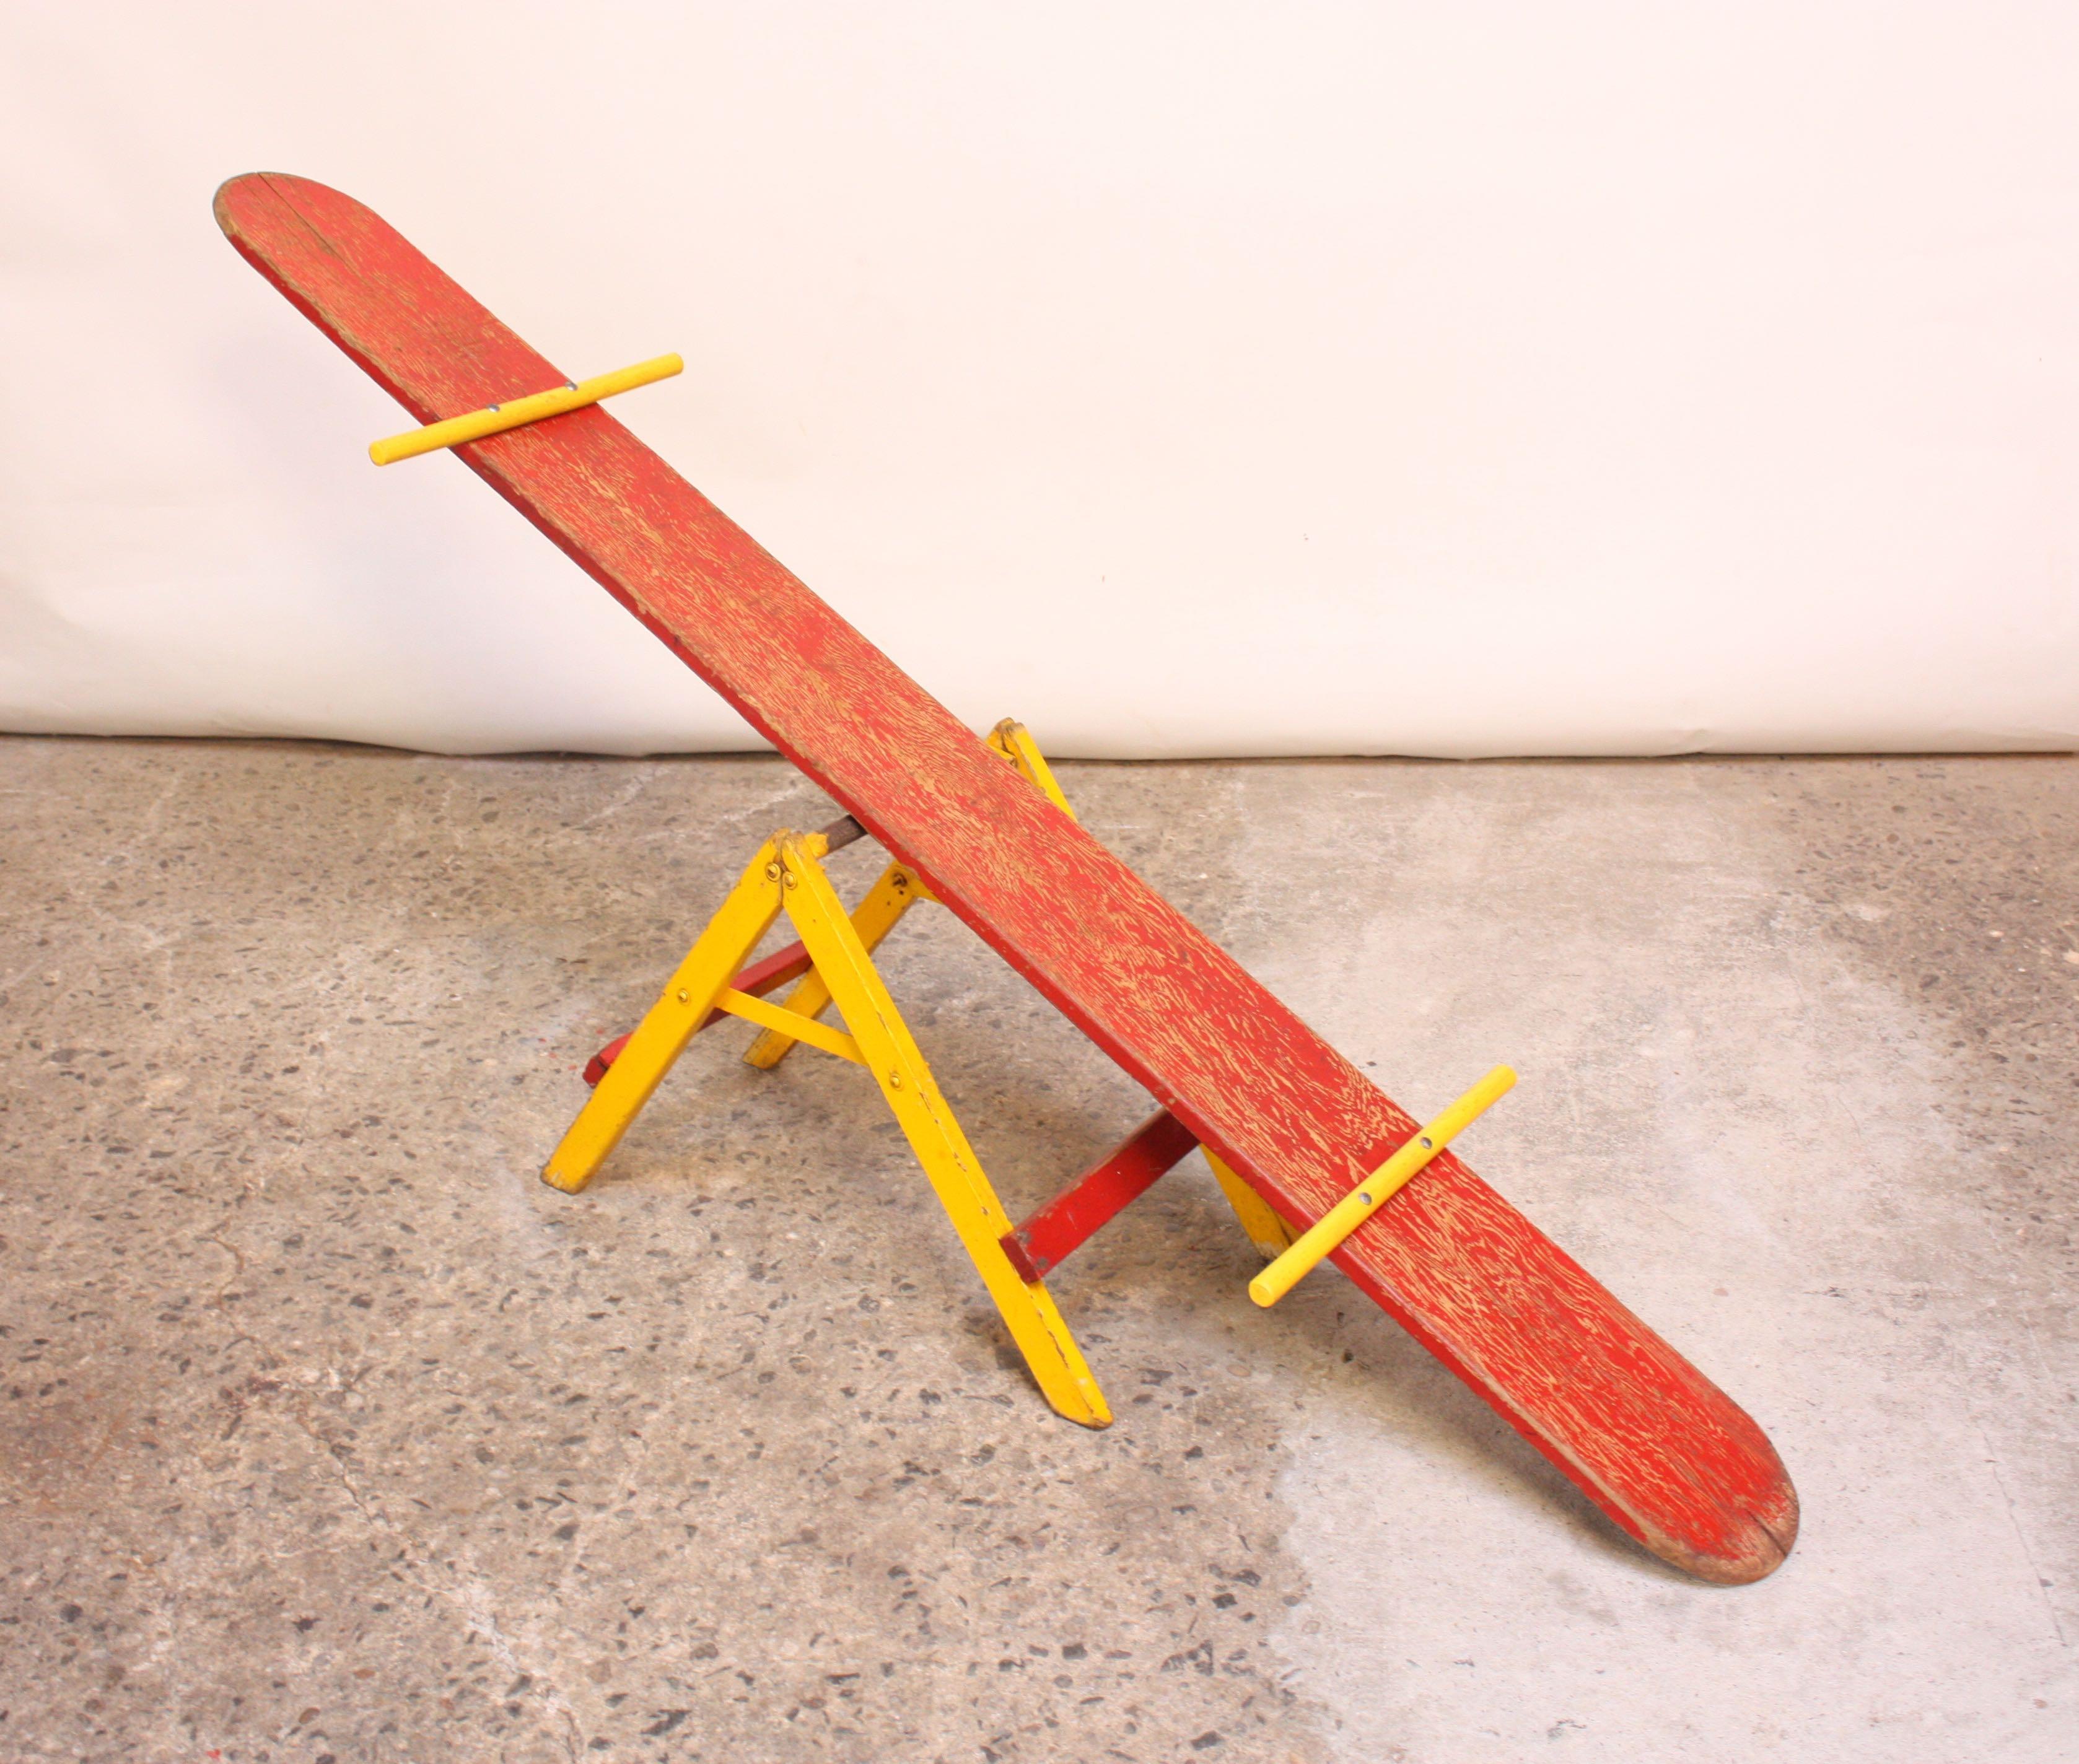 seesaw made of popsicle sticks